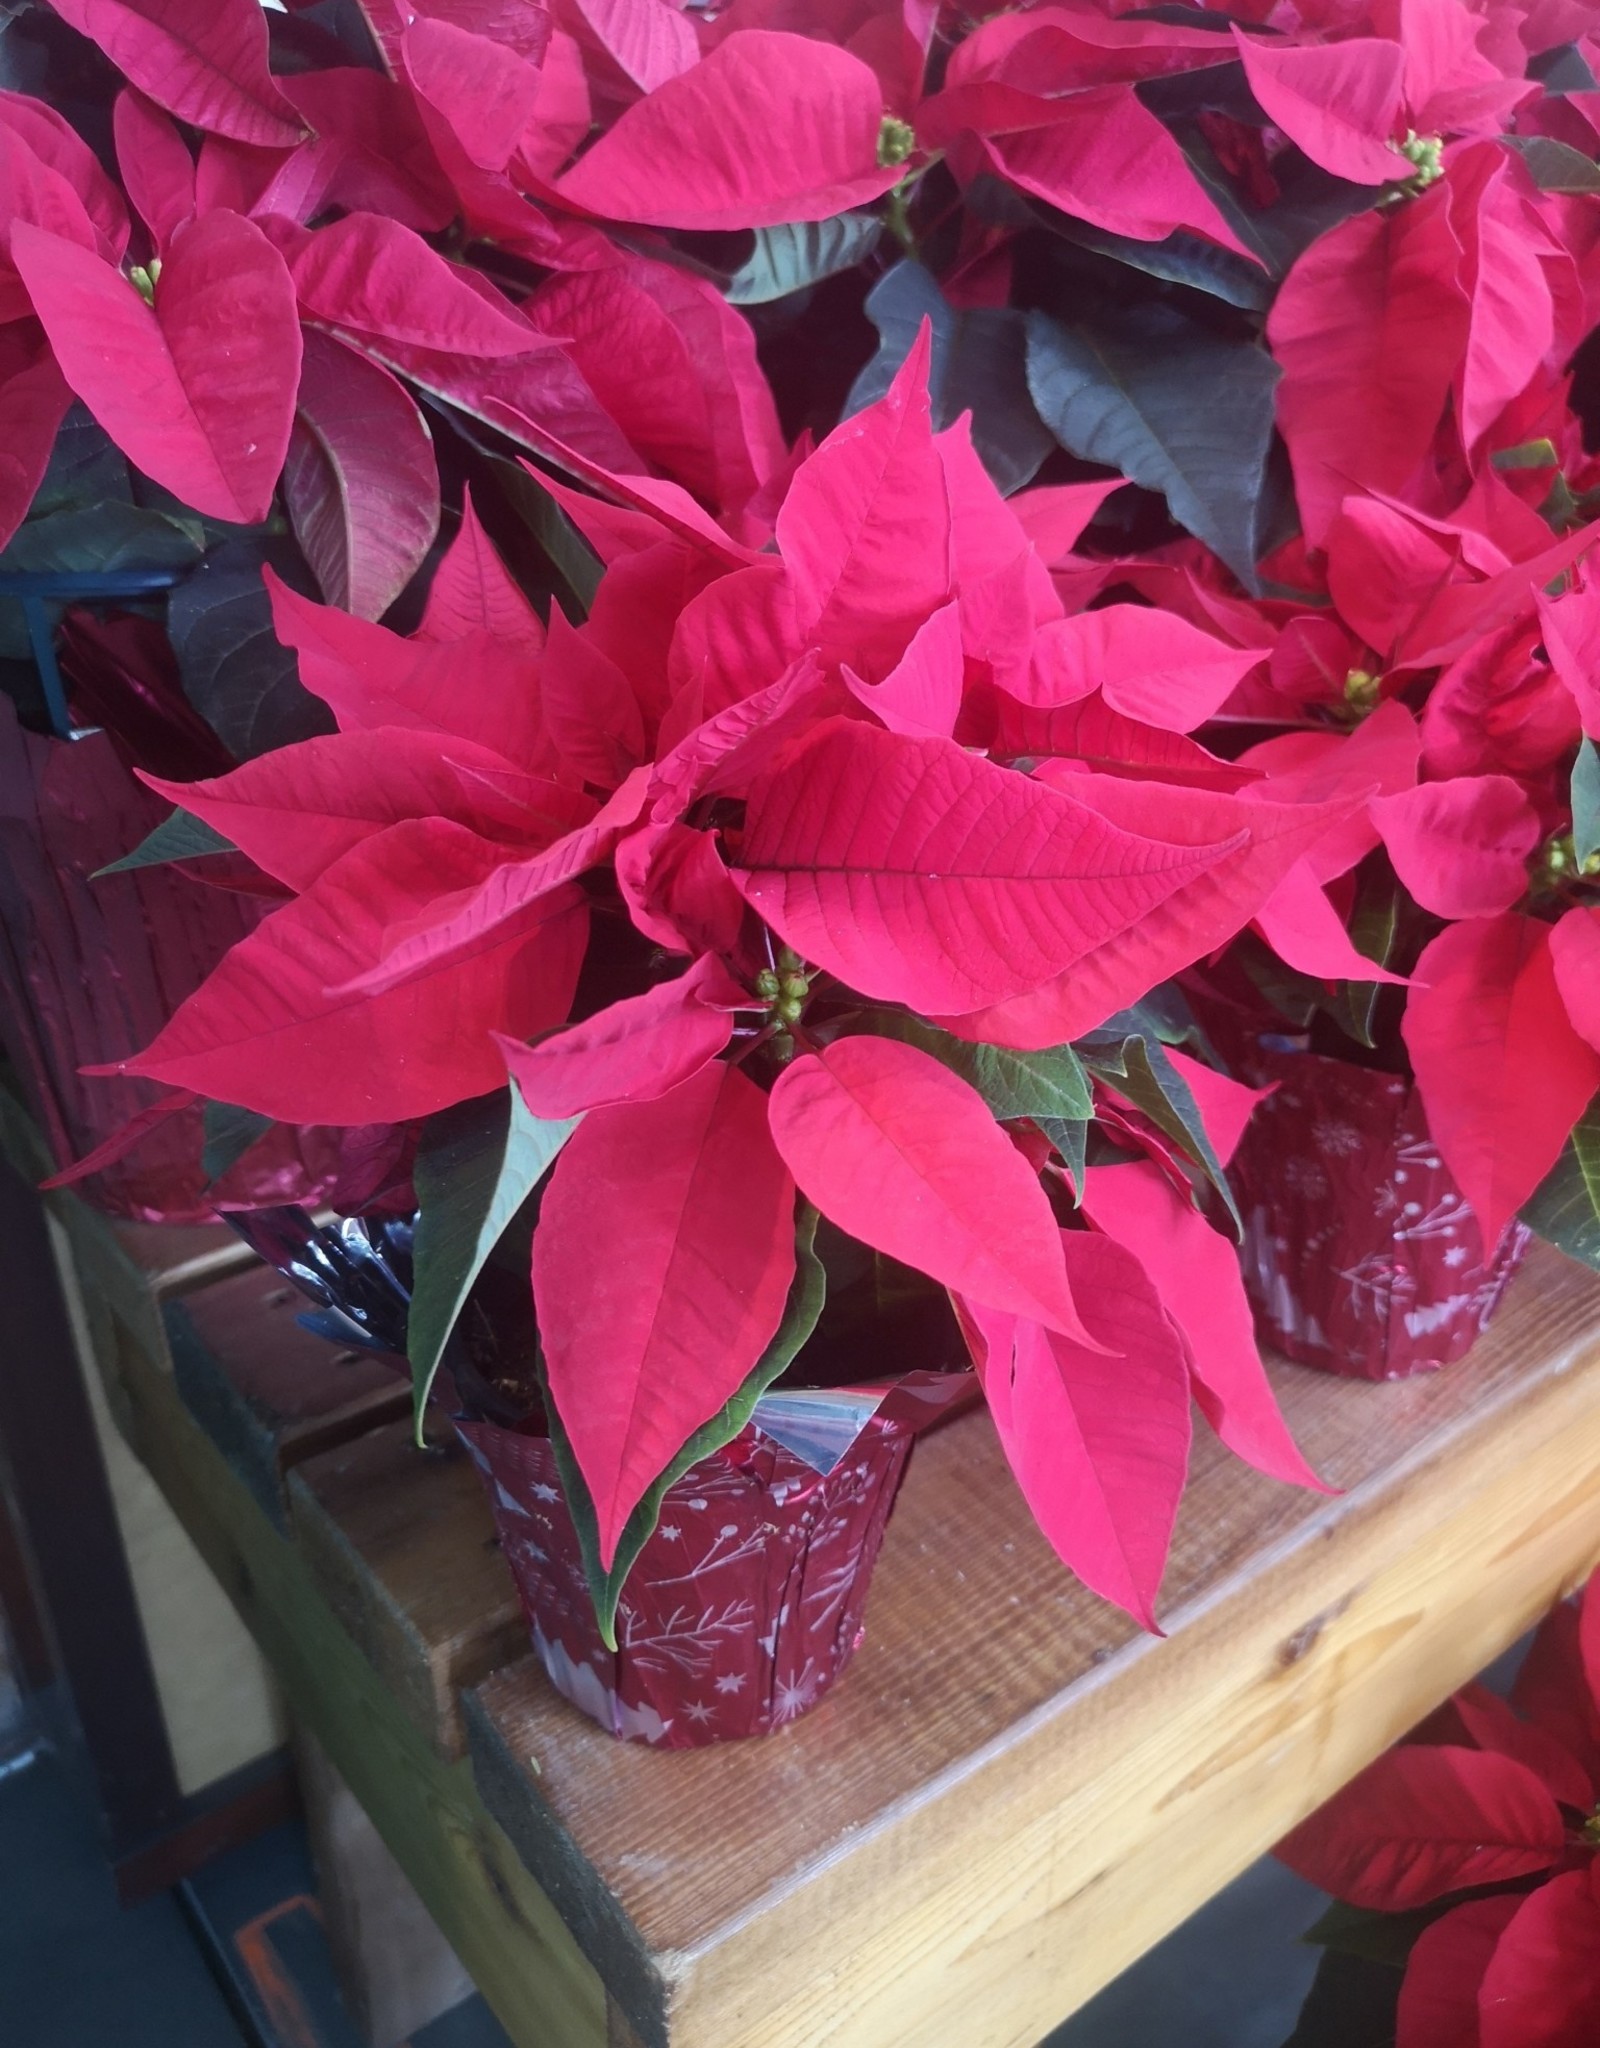 Poinsettia Red 4.5 inch